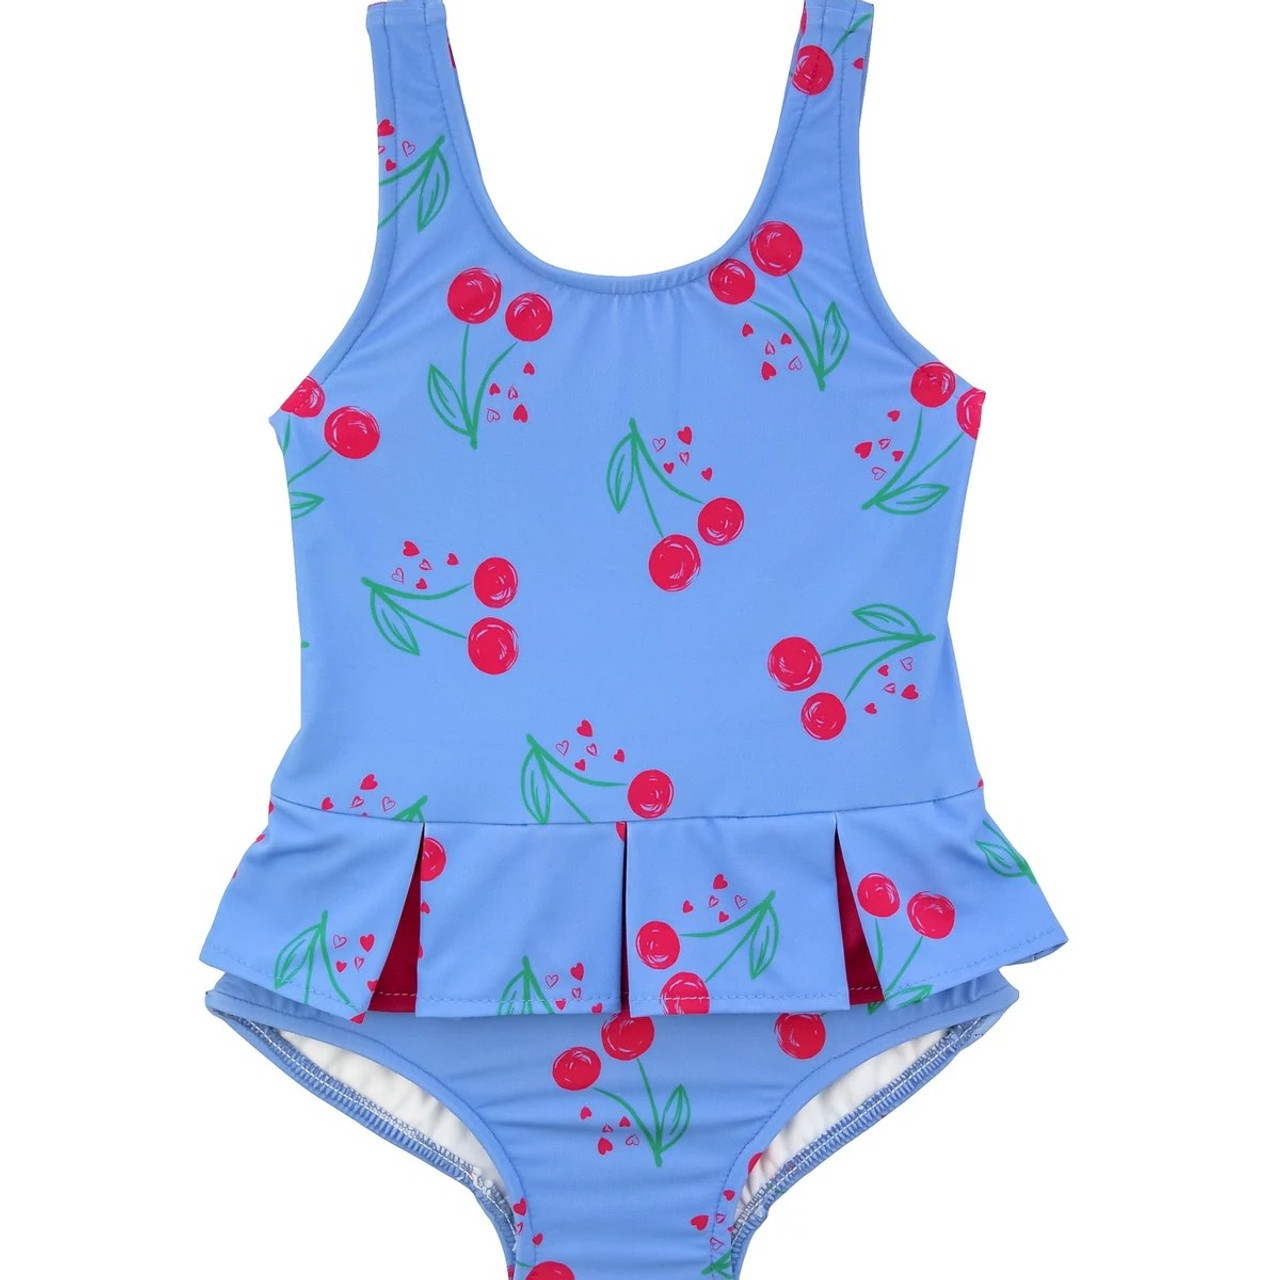 https://cdn11.bigcommerce.com/s-gbr6yfopm8/images/stencil/1280x1280/products/3495/8427/ef76d806_S40327_CherryPrintSwimsuitWithPleats_front__90713.1653320561.jpg?c=2